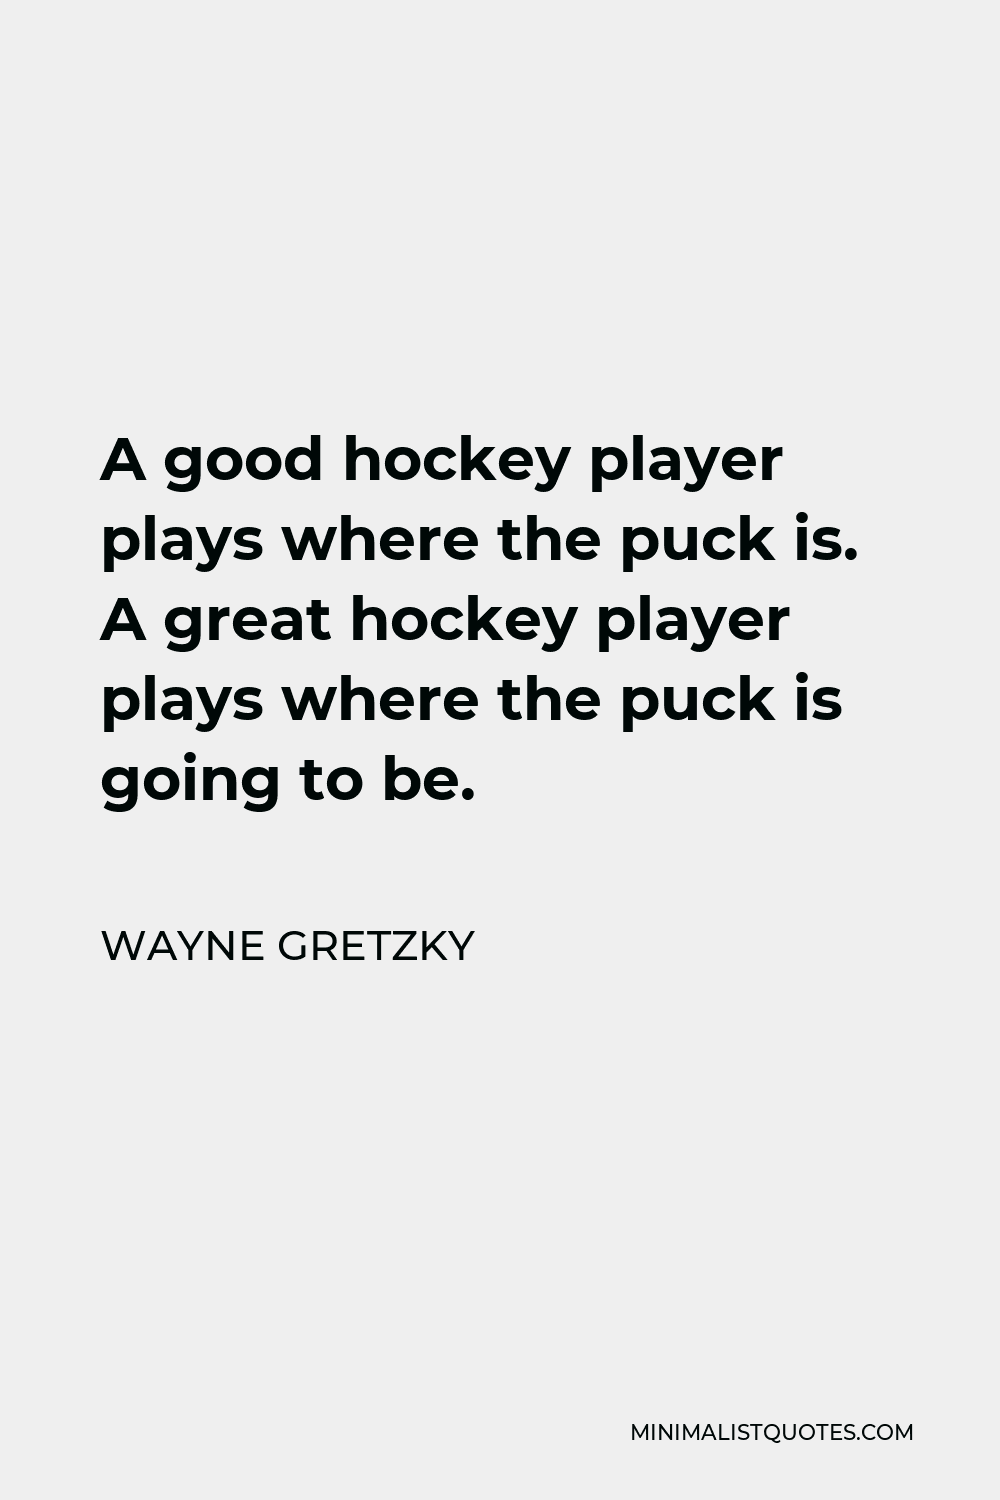 Wayne Gretzky Quote - A good hockey player plays where the puck is. A great hockey player plays where the puck is going to be.